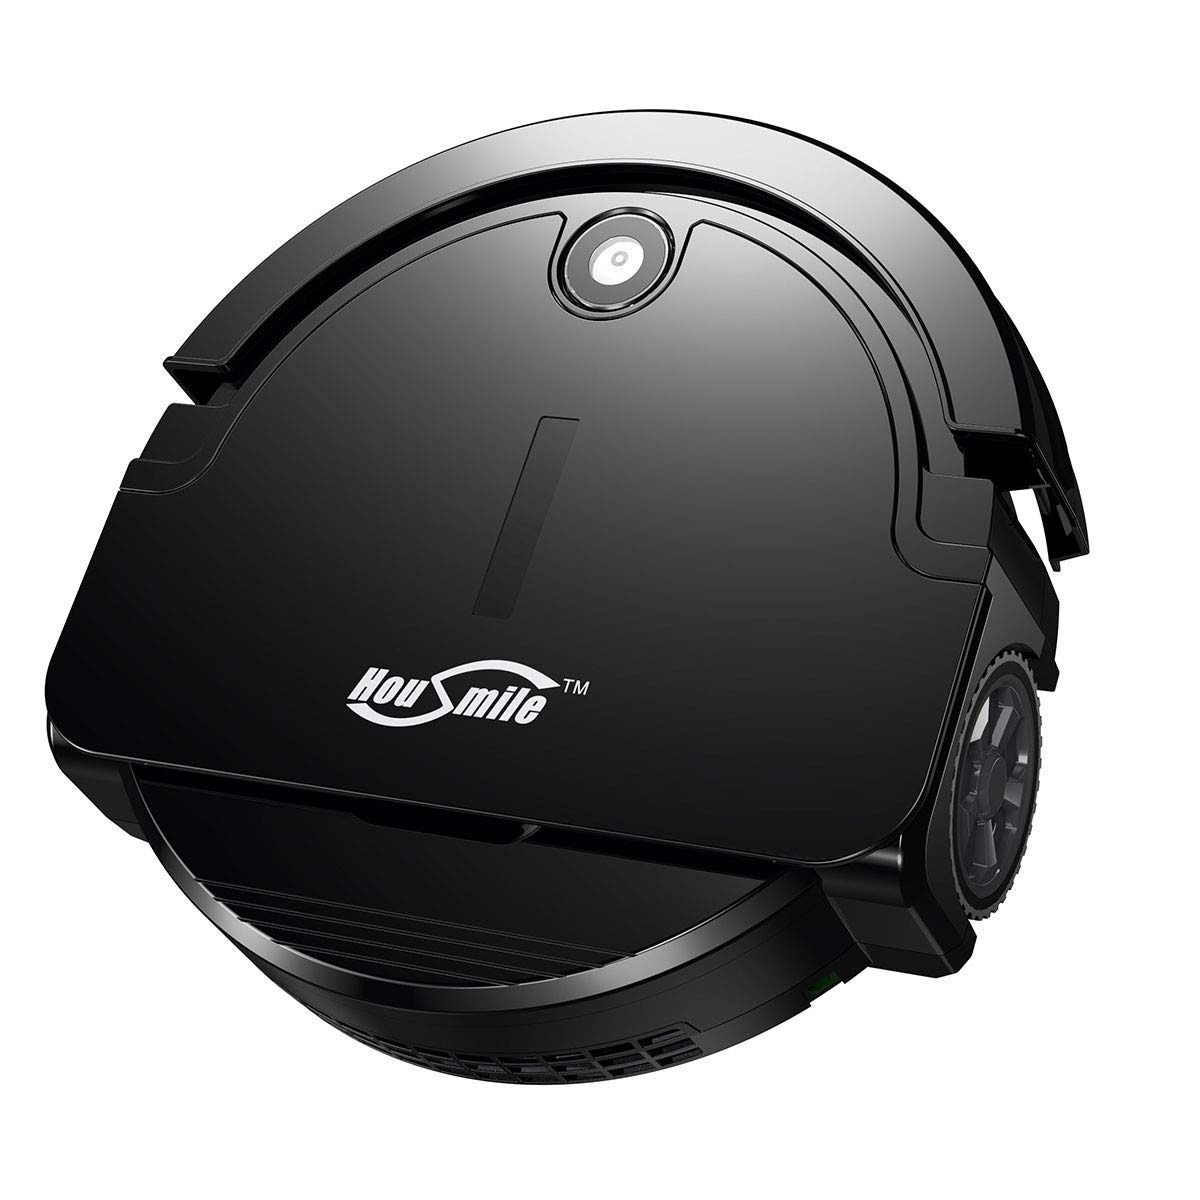 Housmile Robot Vacuum Cleaner Usually $94.99 On Sale For ...